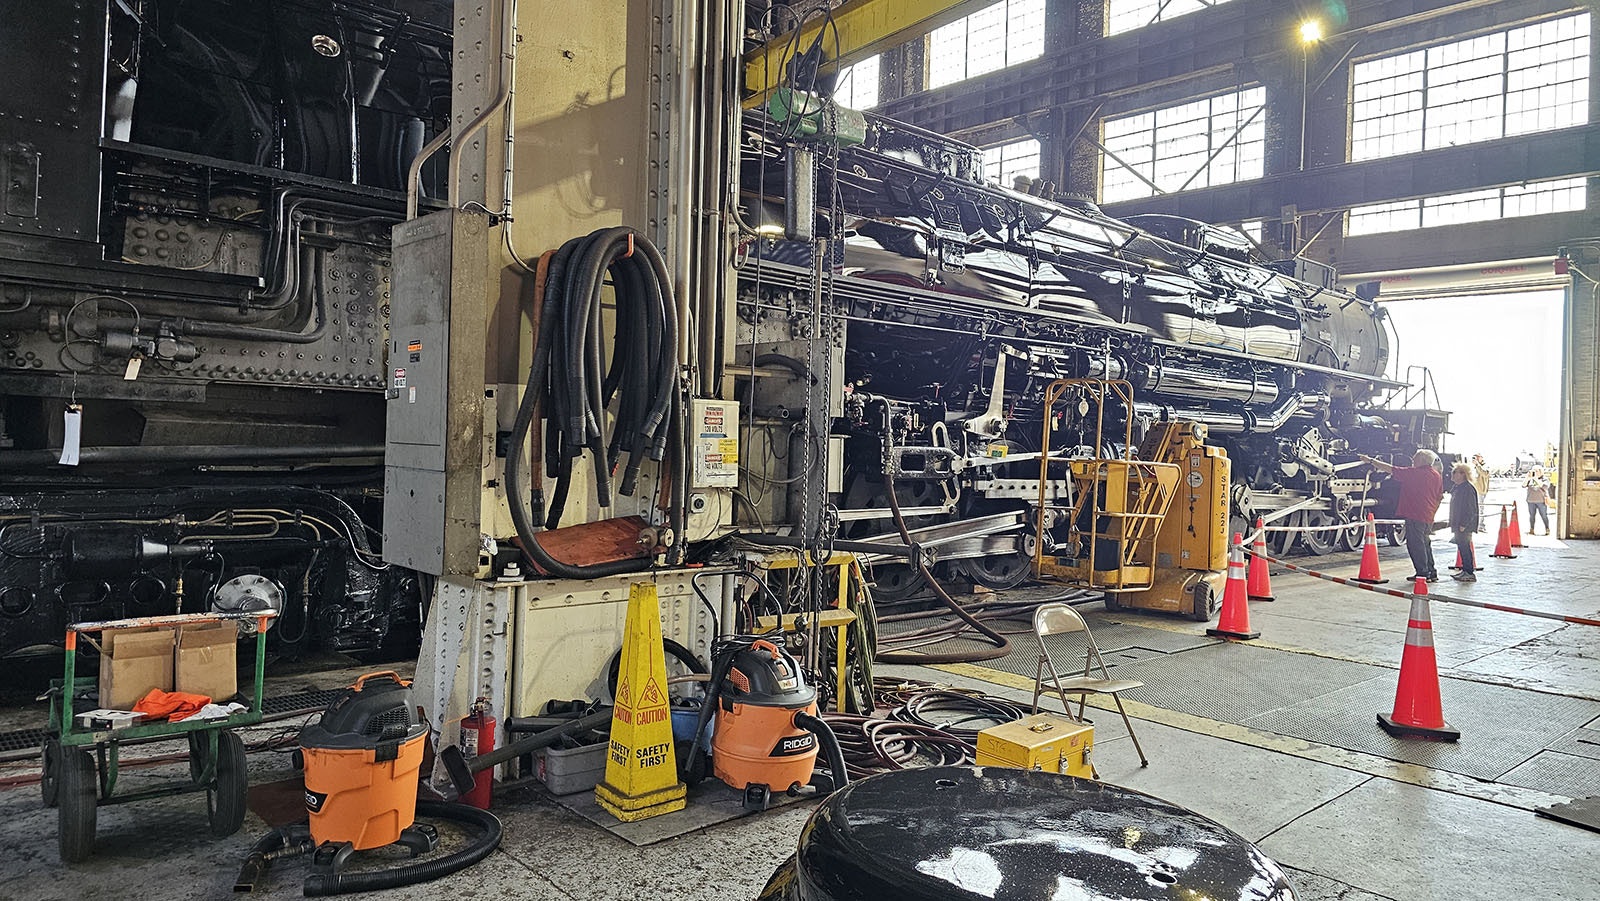 Union Pacific's Steam Shop was open for tours last weekend, ahead of Big Boy's June 30 summer tour.